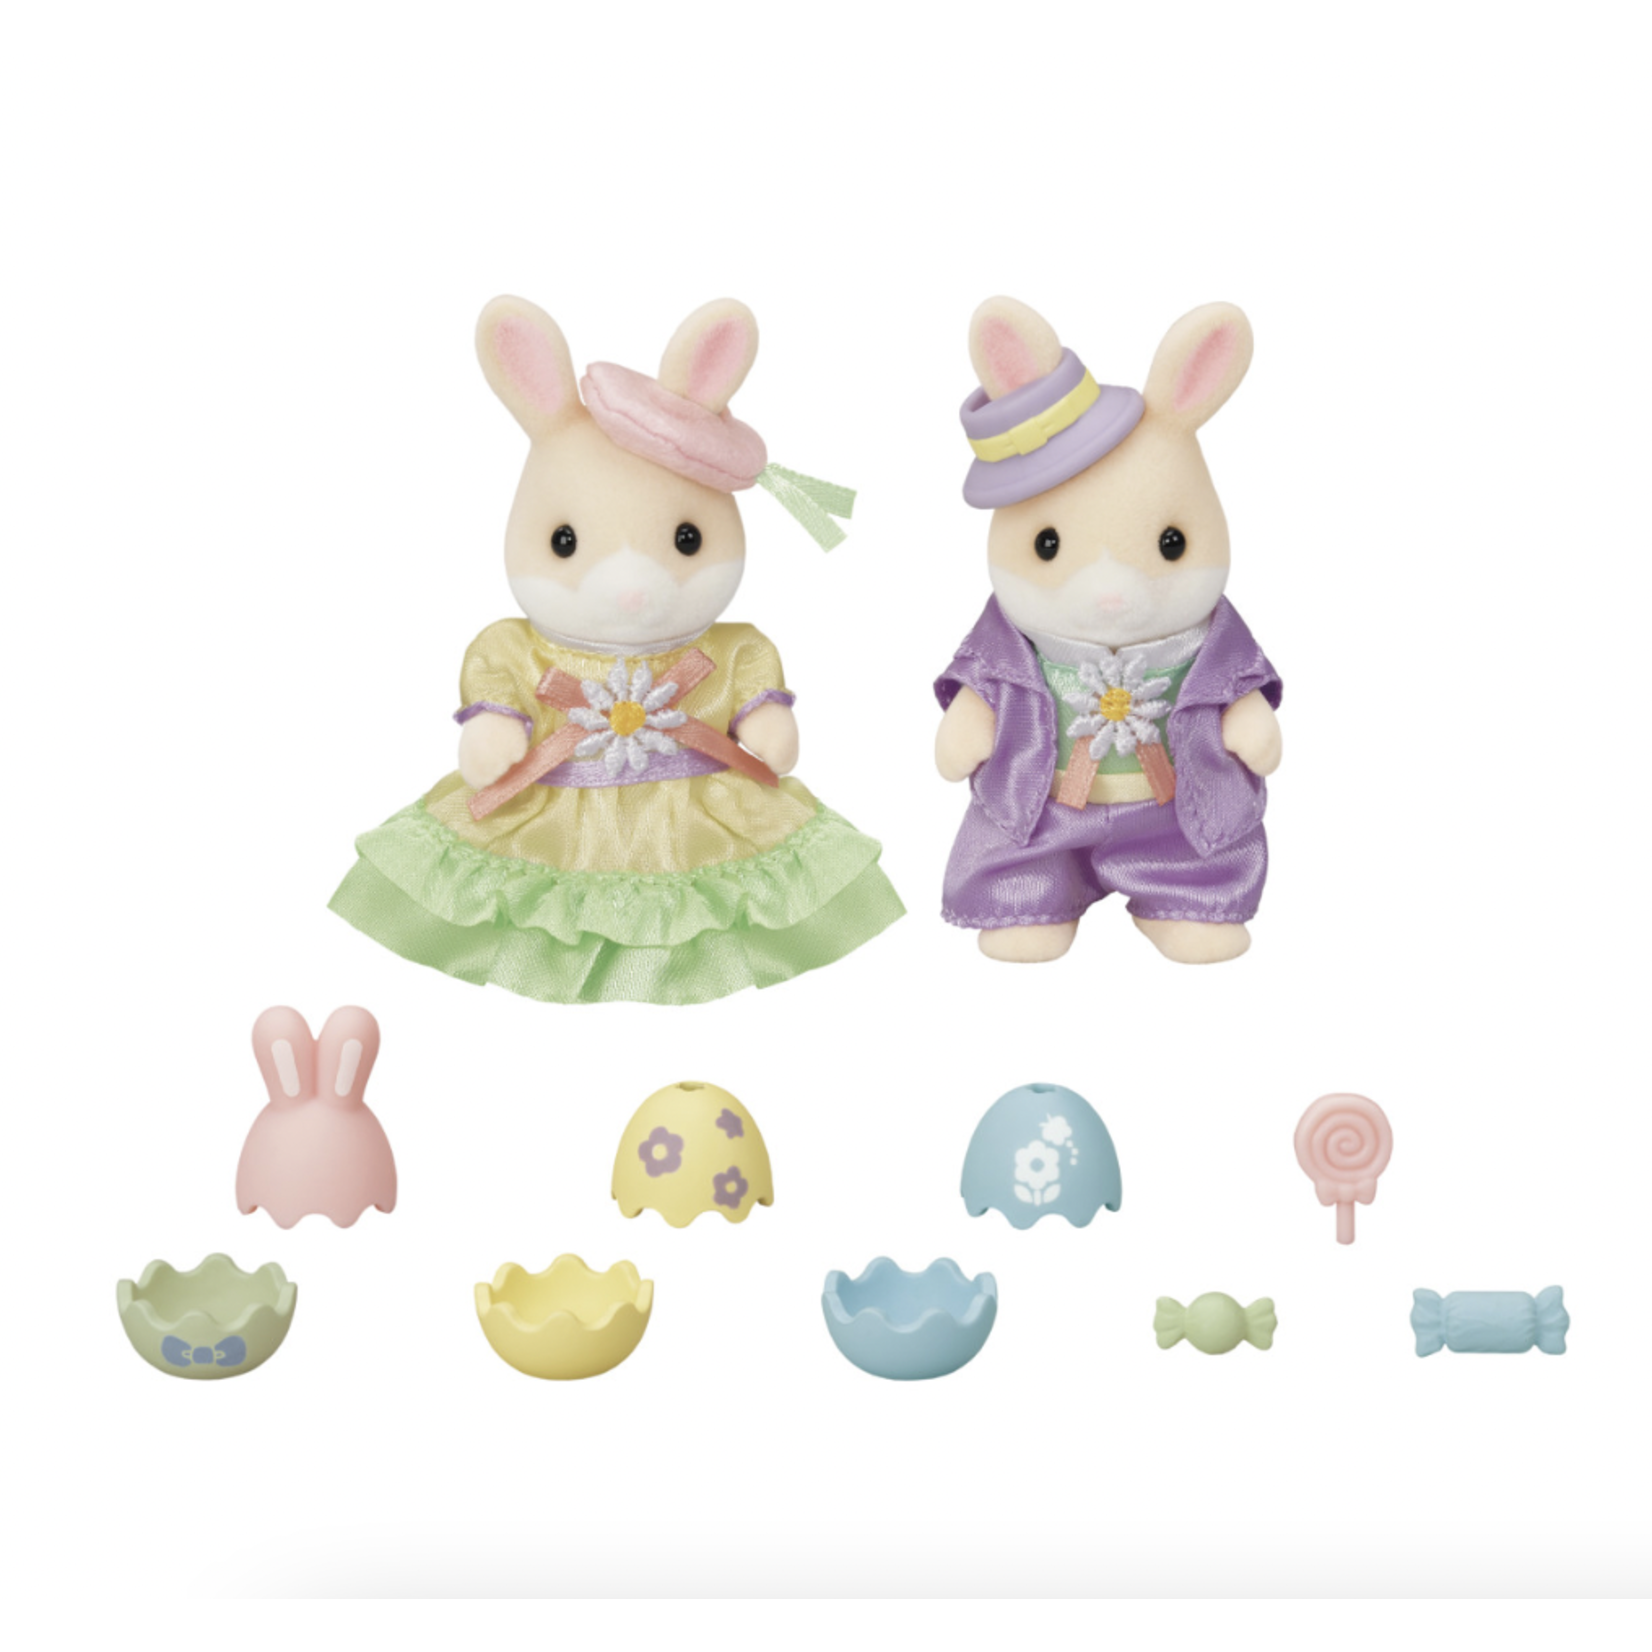 Calico Critters Calico Critters Easter Celebration Set